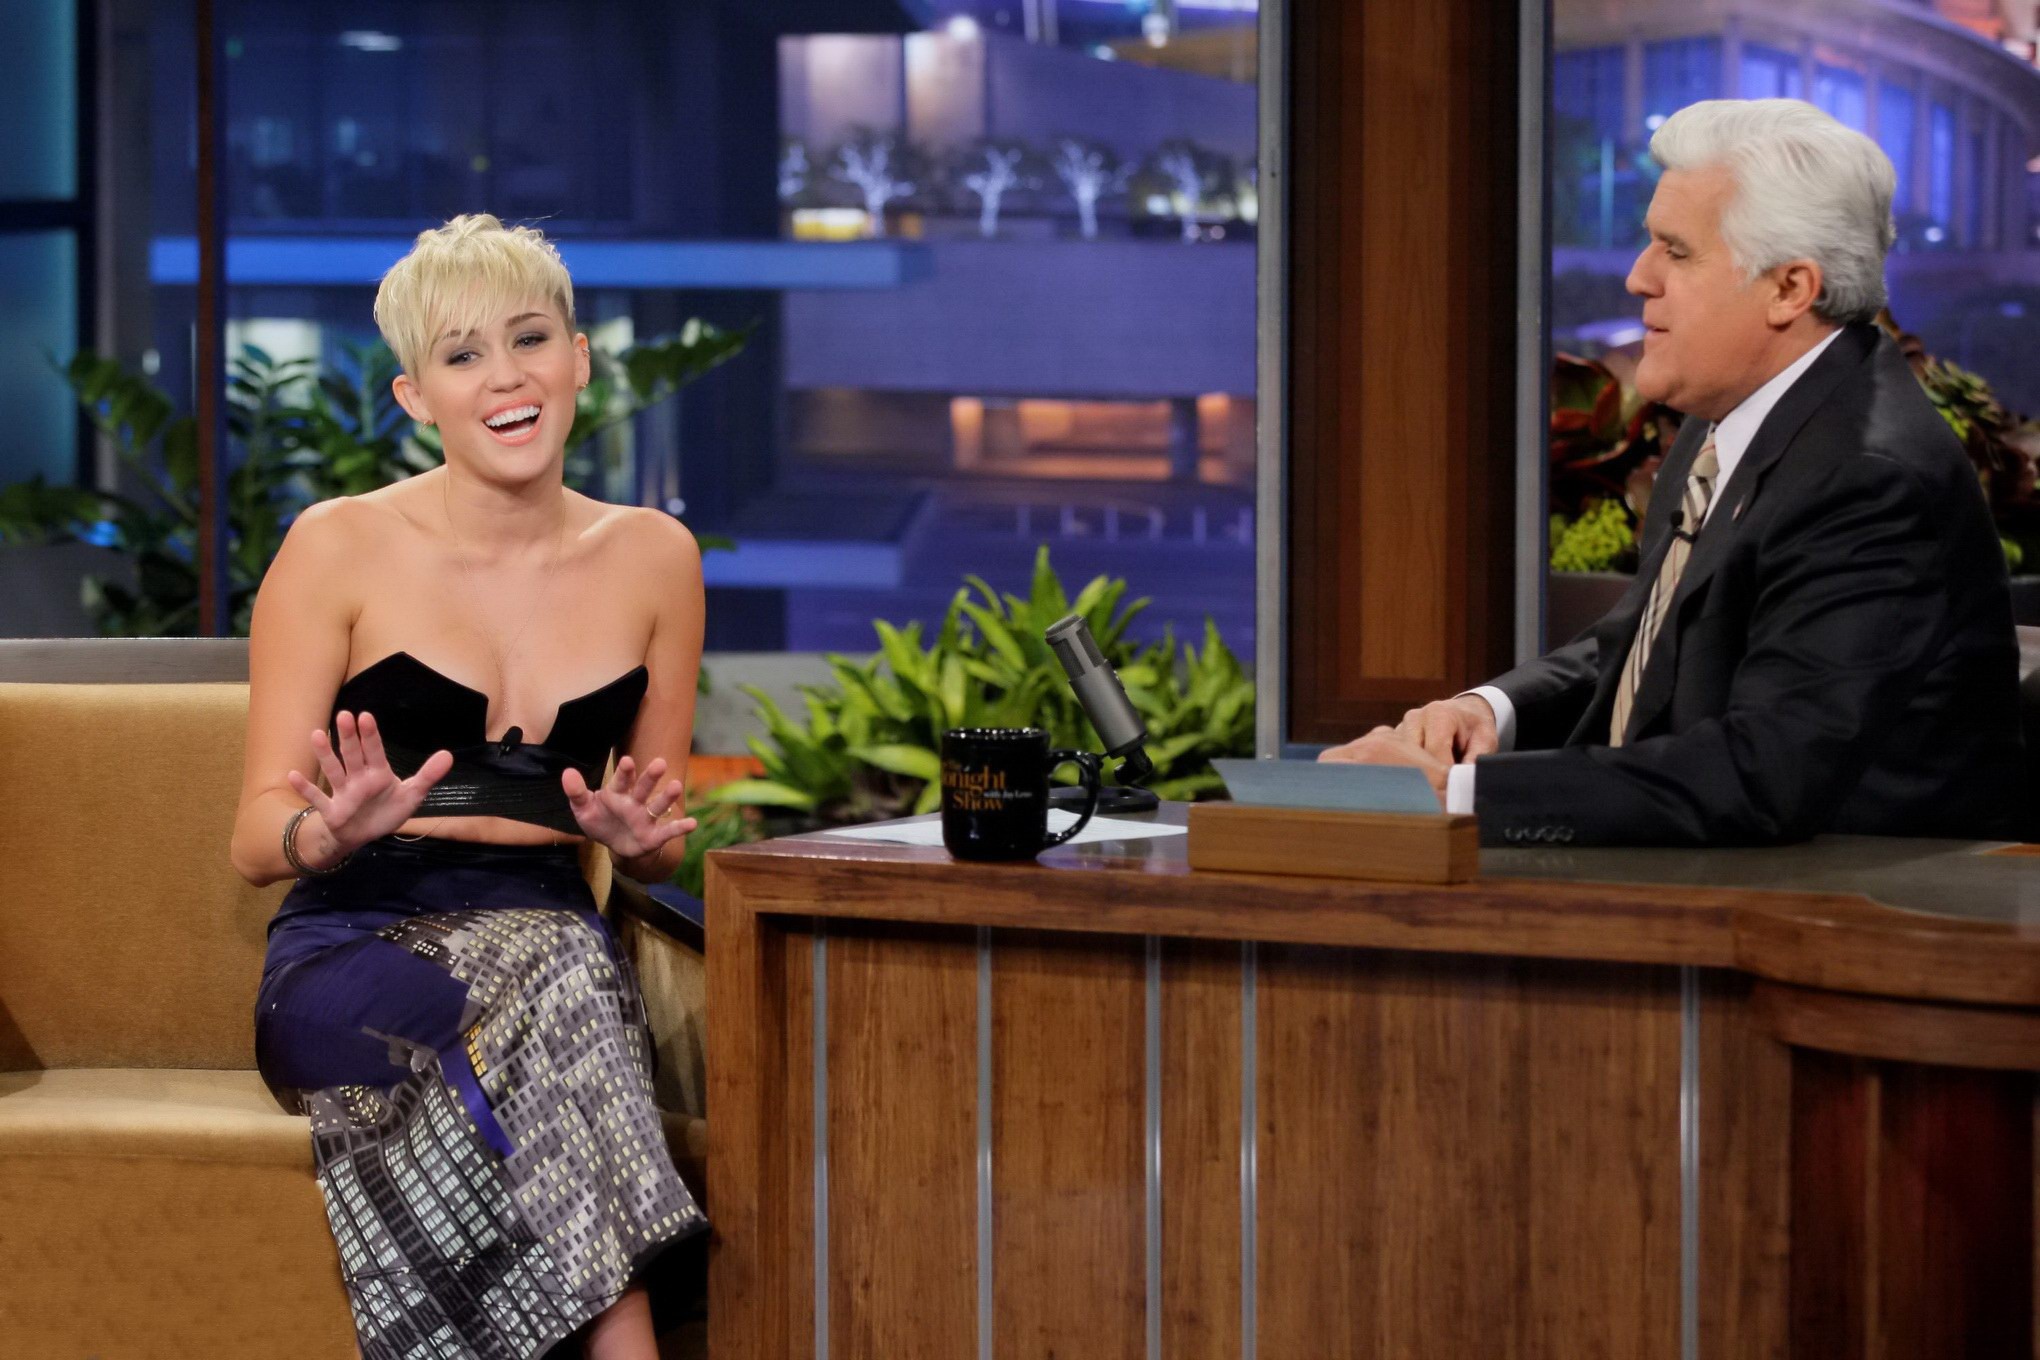 Miley Cyrus braless wears very revealing dress on The Tonight Show with Jay Leno #75250756